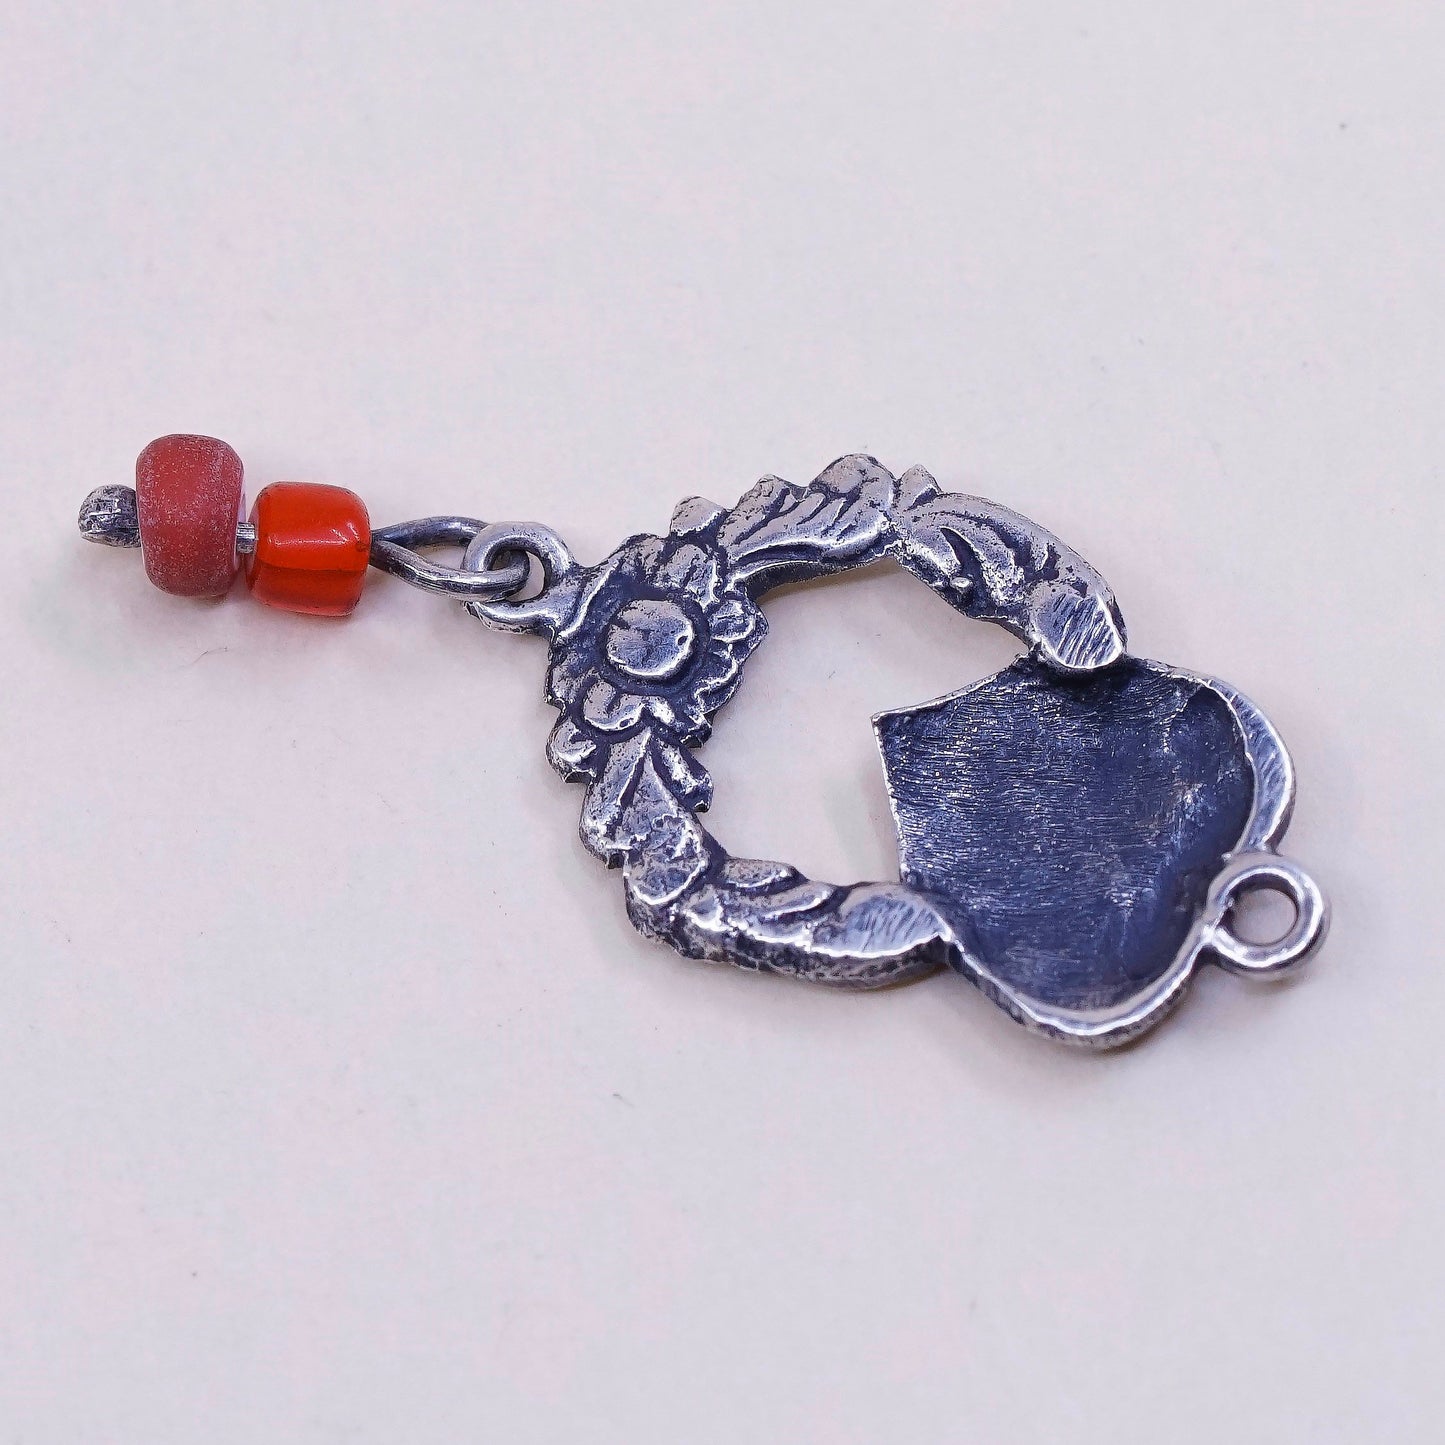 VTG handmade sterling silver charm, 925 heart pendant W/ coral, silver tested